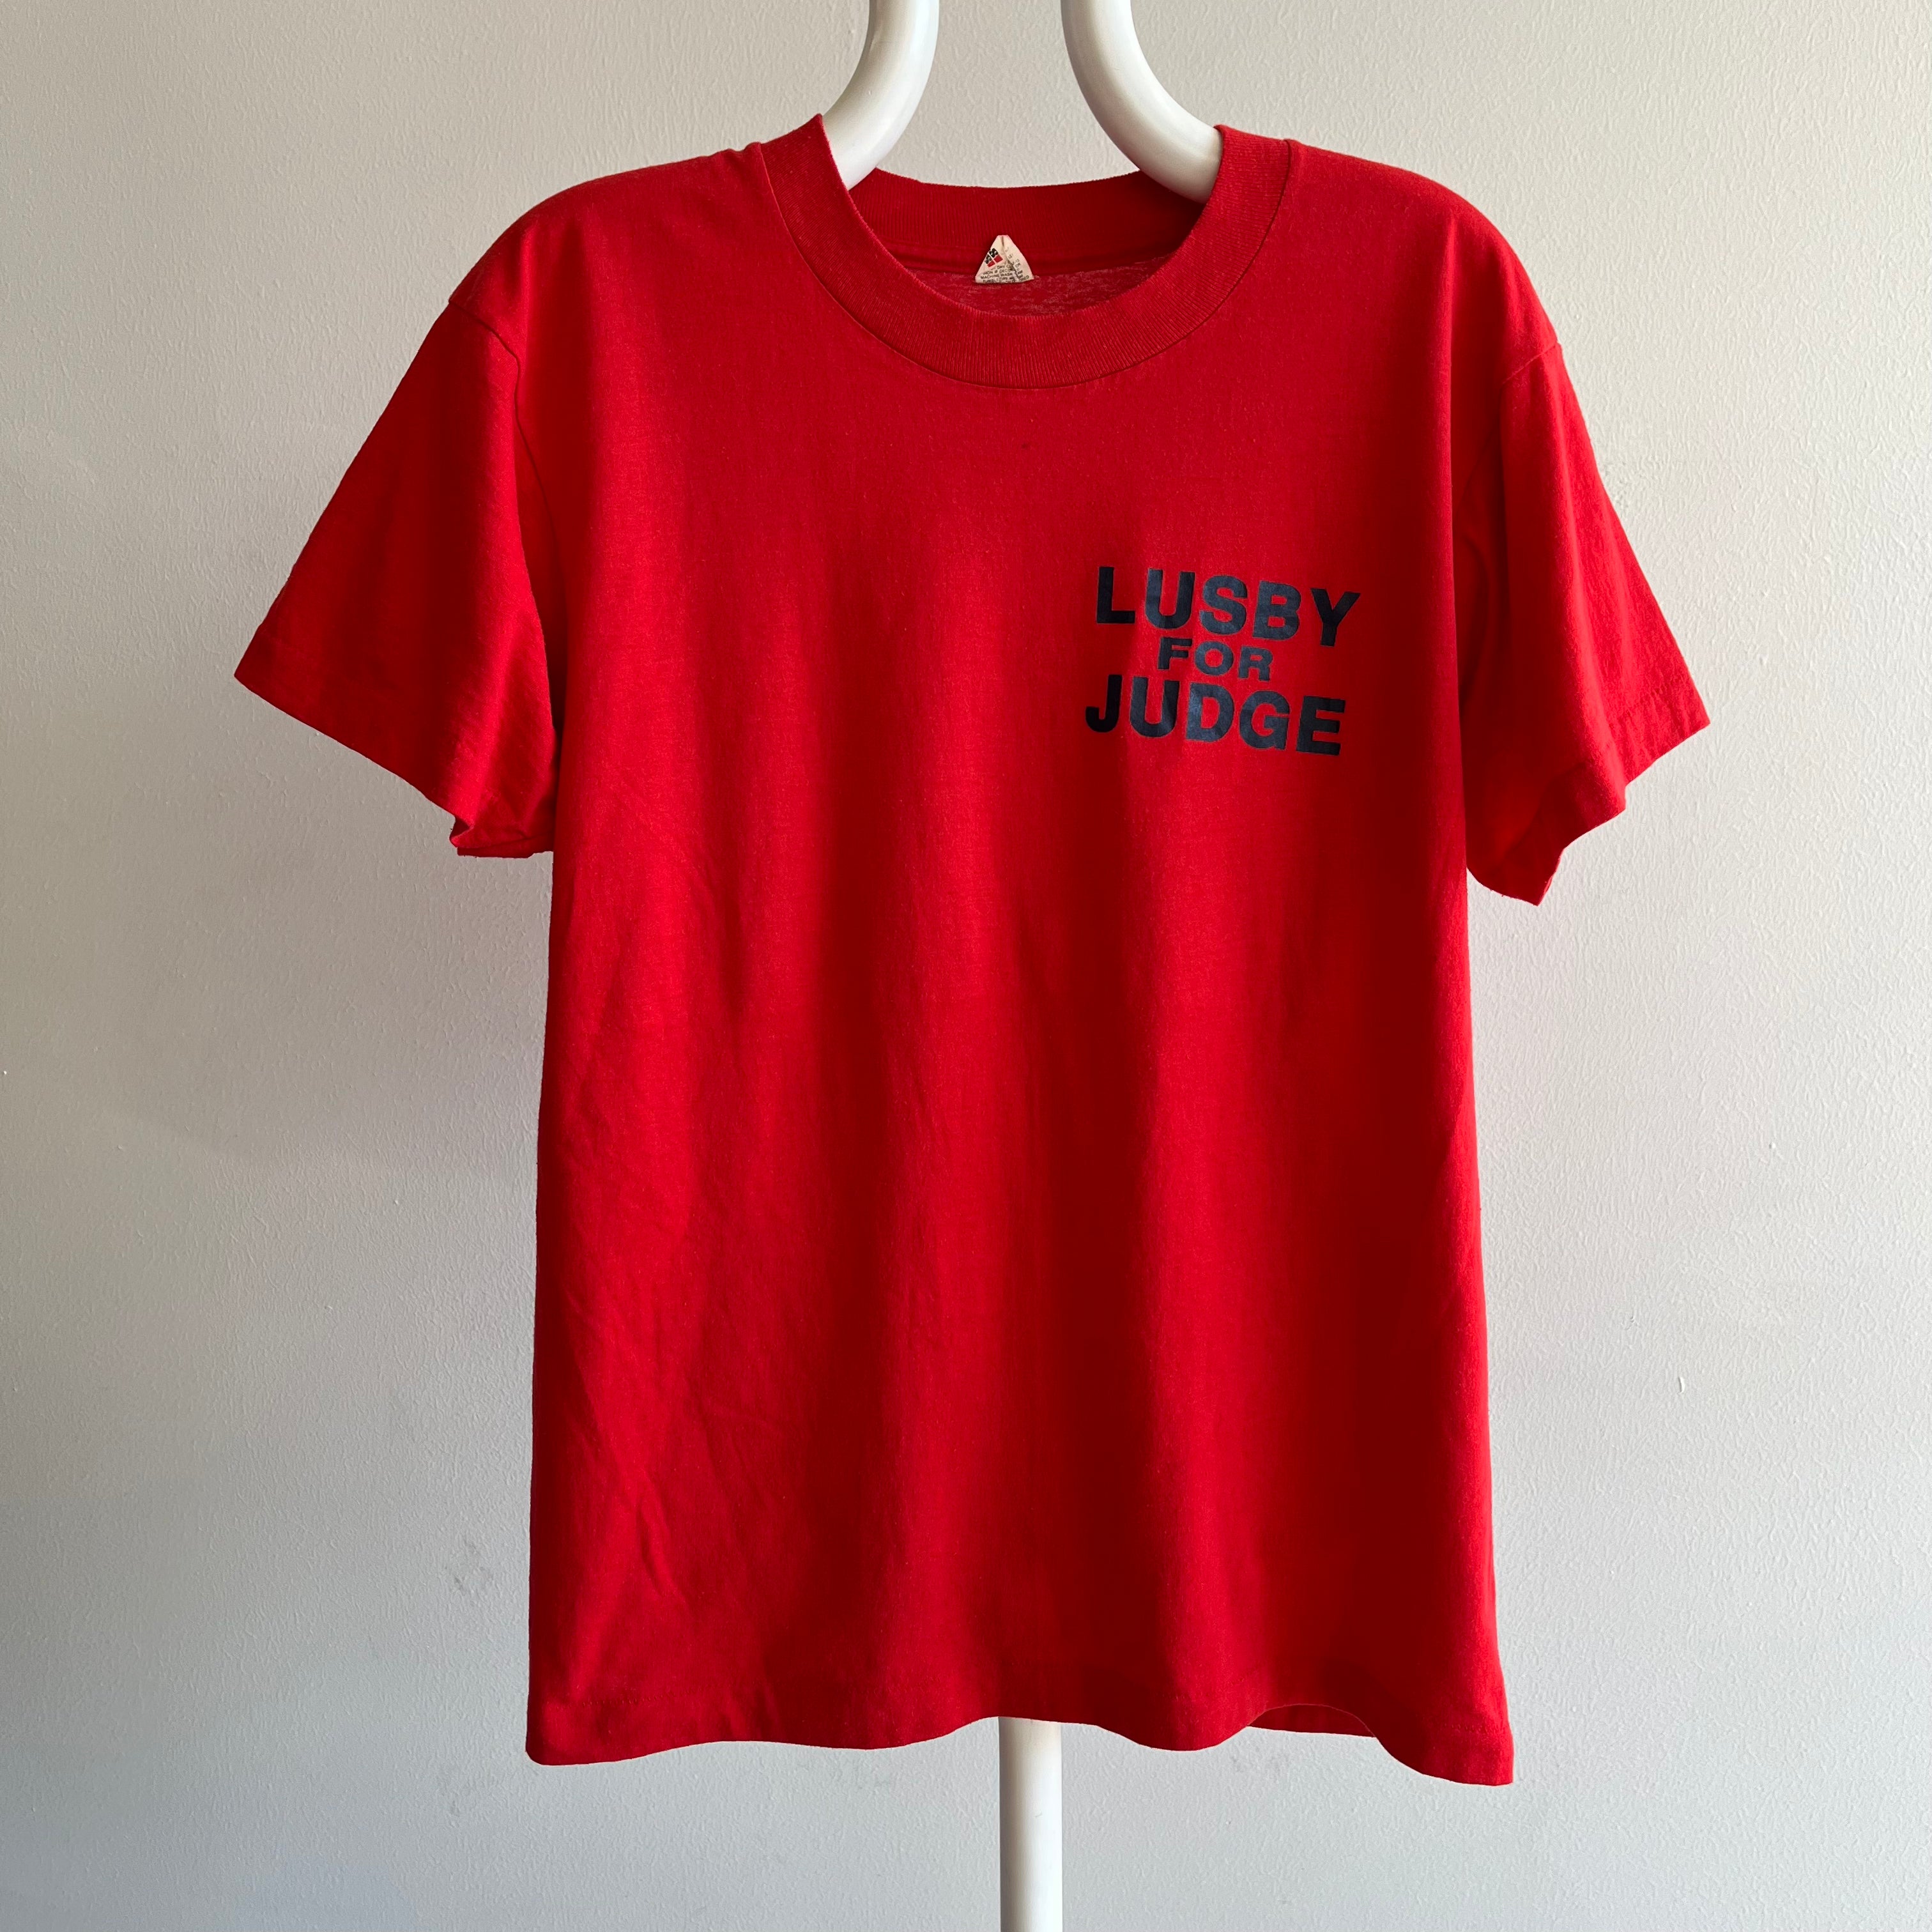 1980s Lubsy For Judge T-Shirt by Screen Stars